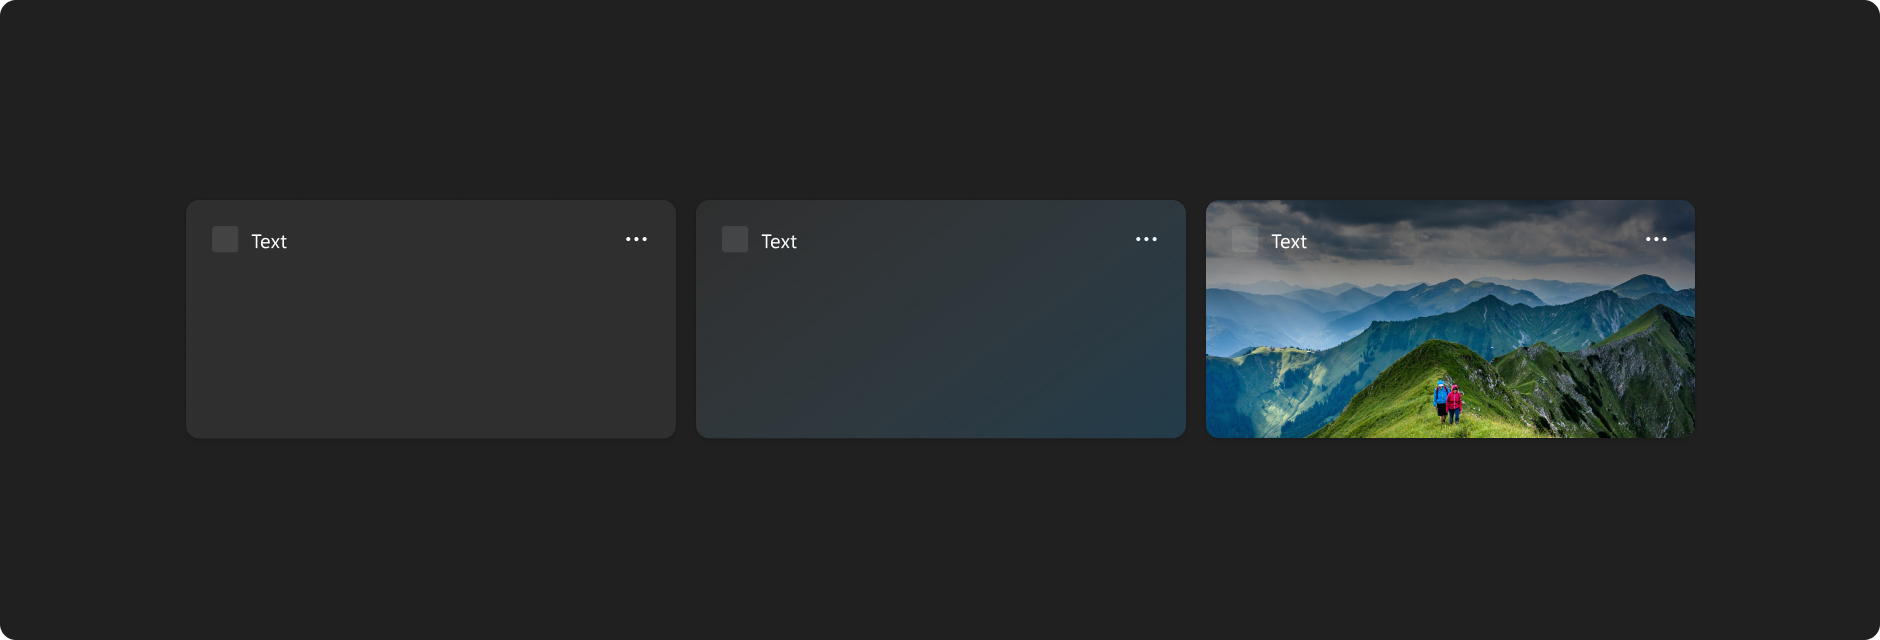 Three example widget templates demonstrating the dark theme. The first is an empty widget with a black backgroud. The second is an empty widget with a dark gradient background. The third is a widget with an image background. All three have the word 